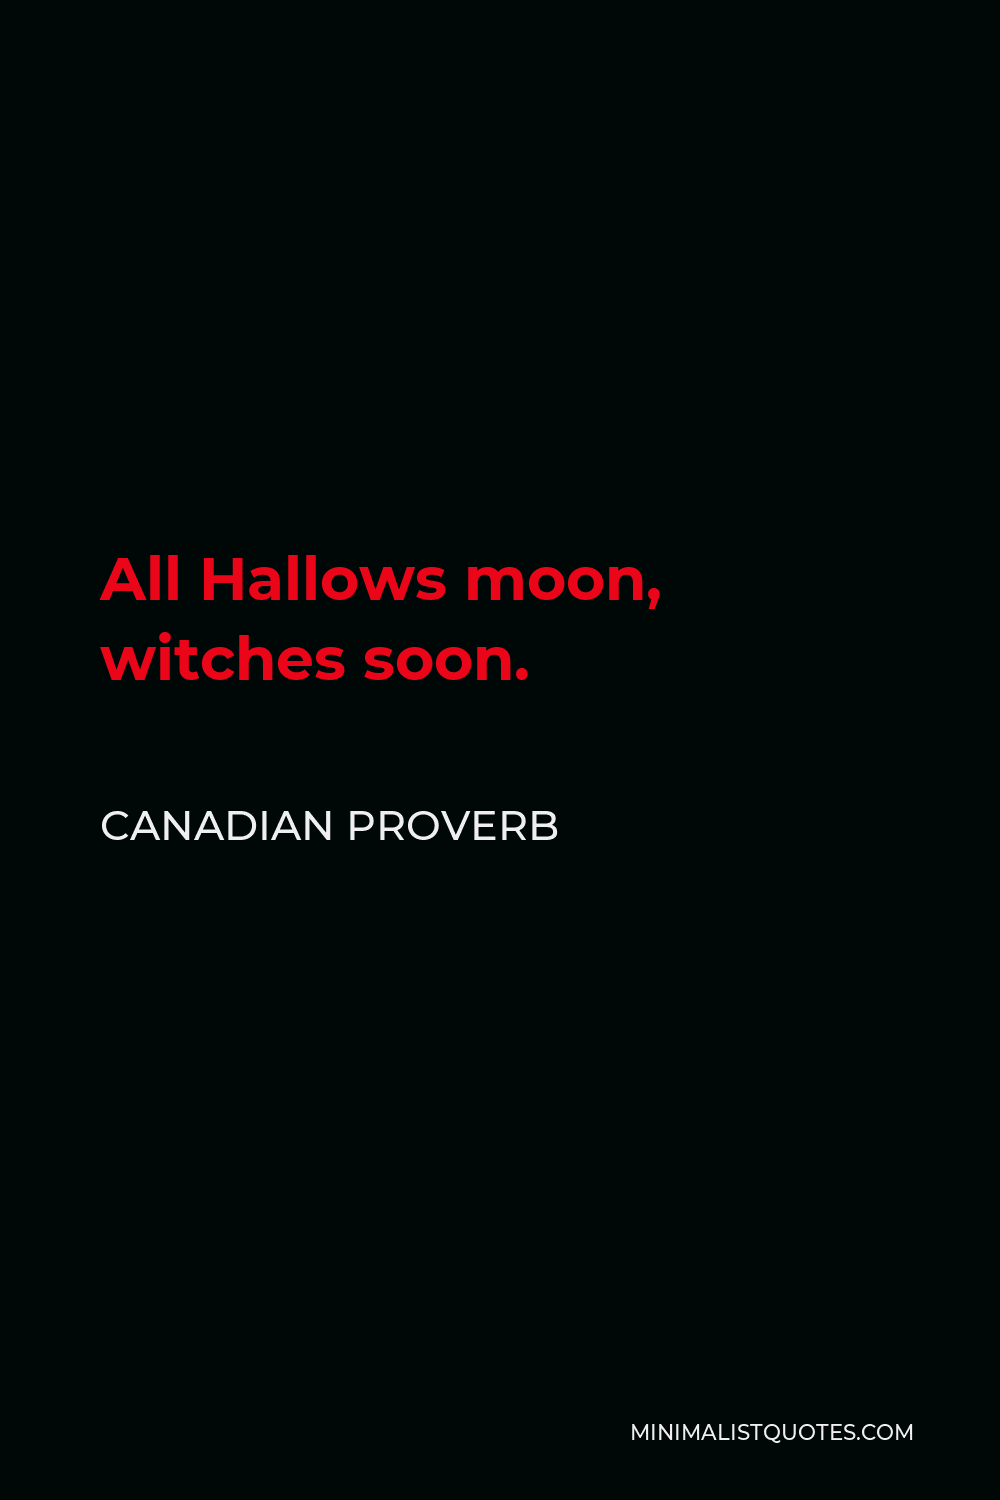 Canadian Proverb Quote - All Hallows moon, witches soon.